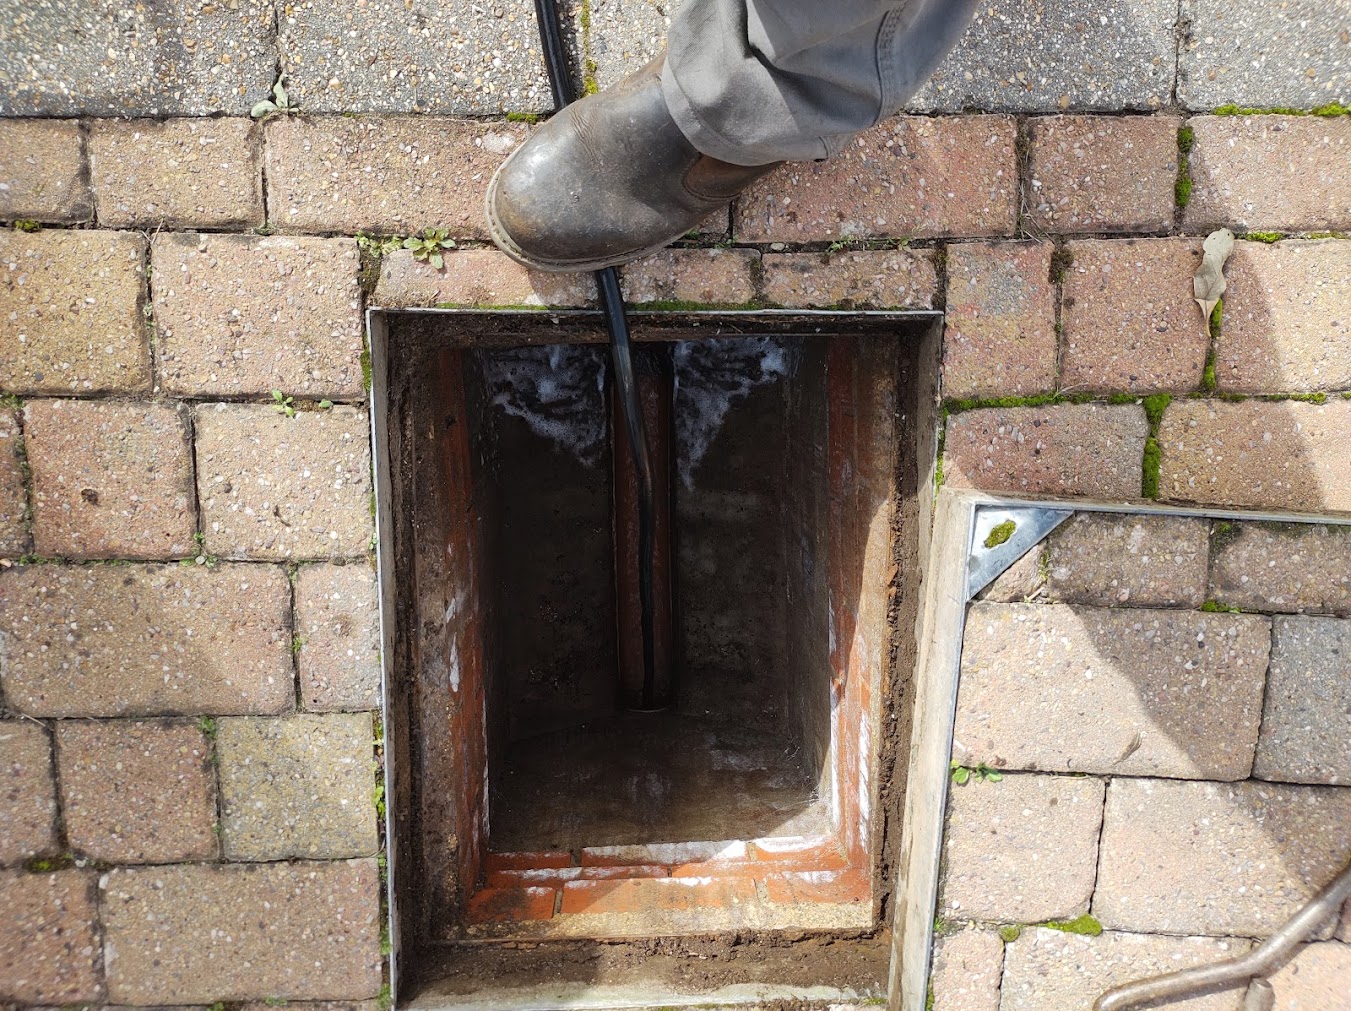 Drain Unblocking service in Reading and surrounding area's